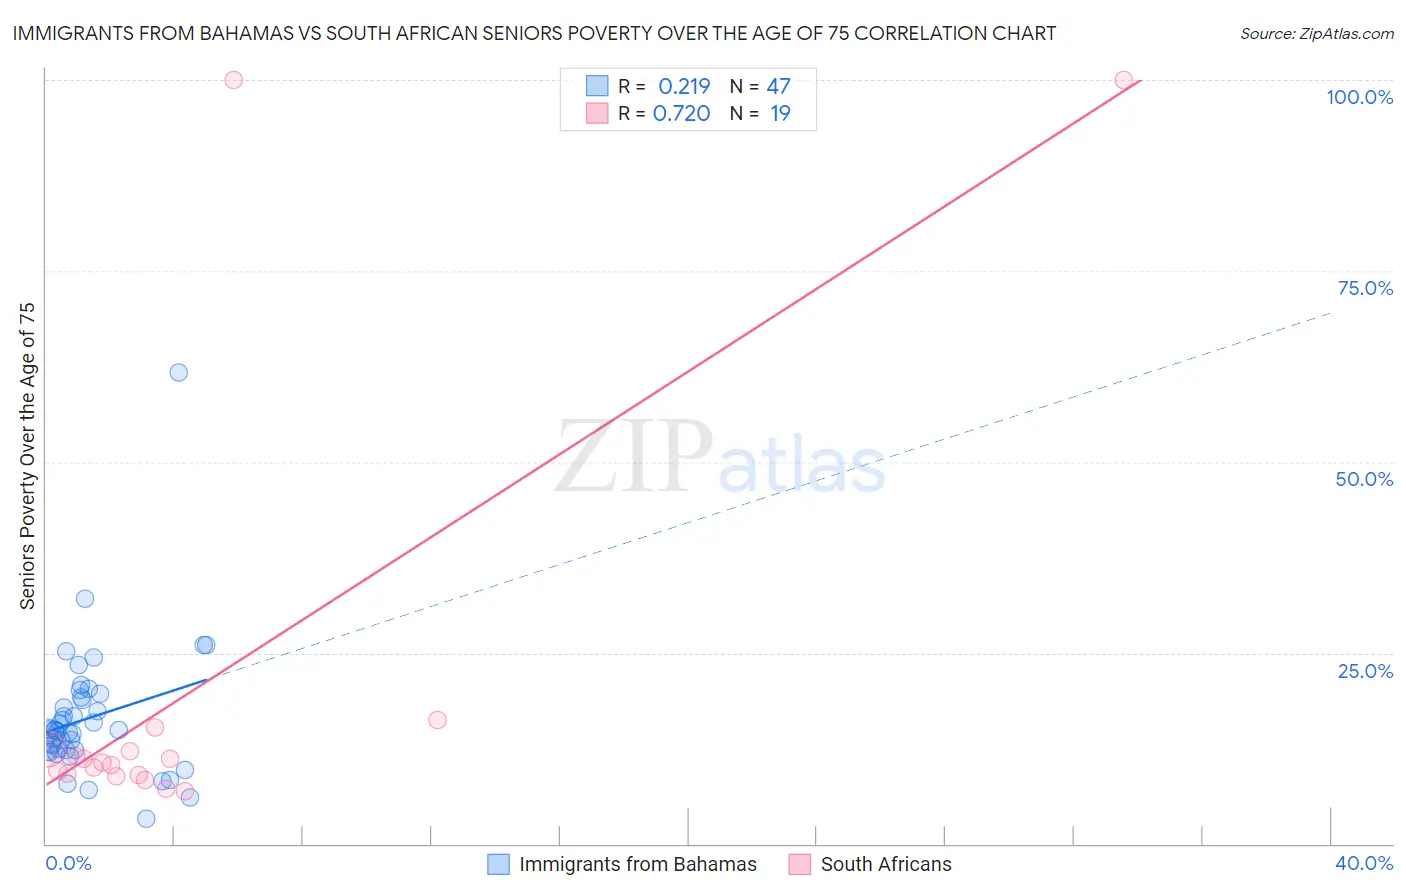 Immigrants from Bahamas vs South African Seniors Poverty Over the Age of 75